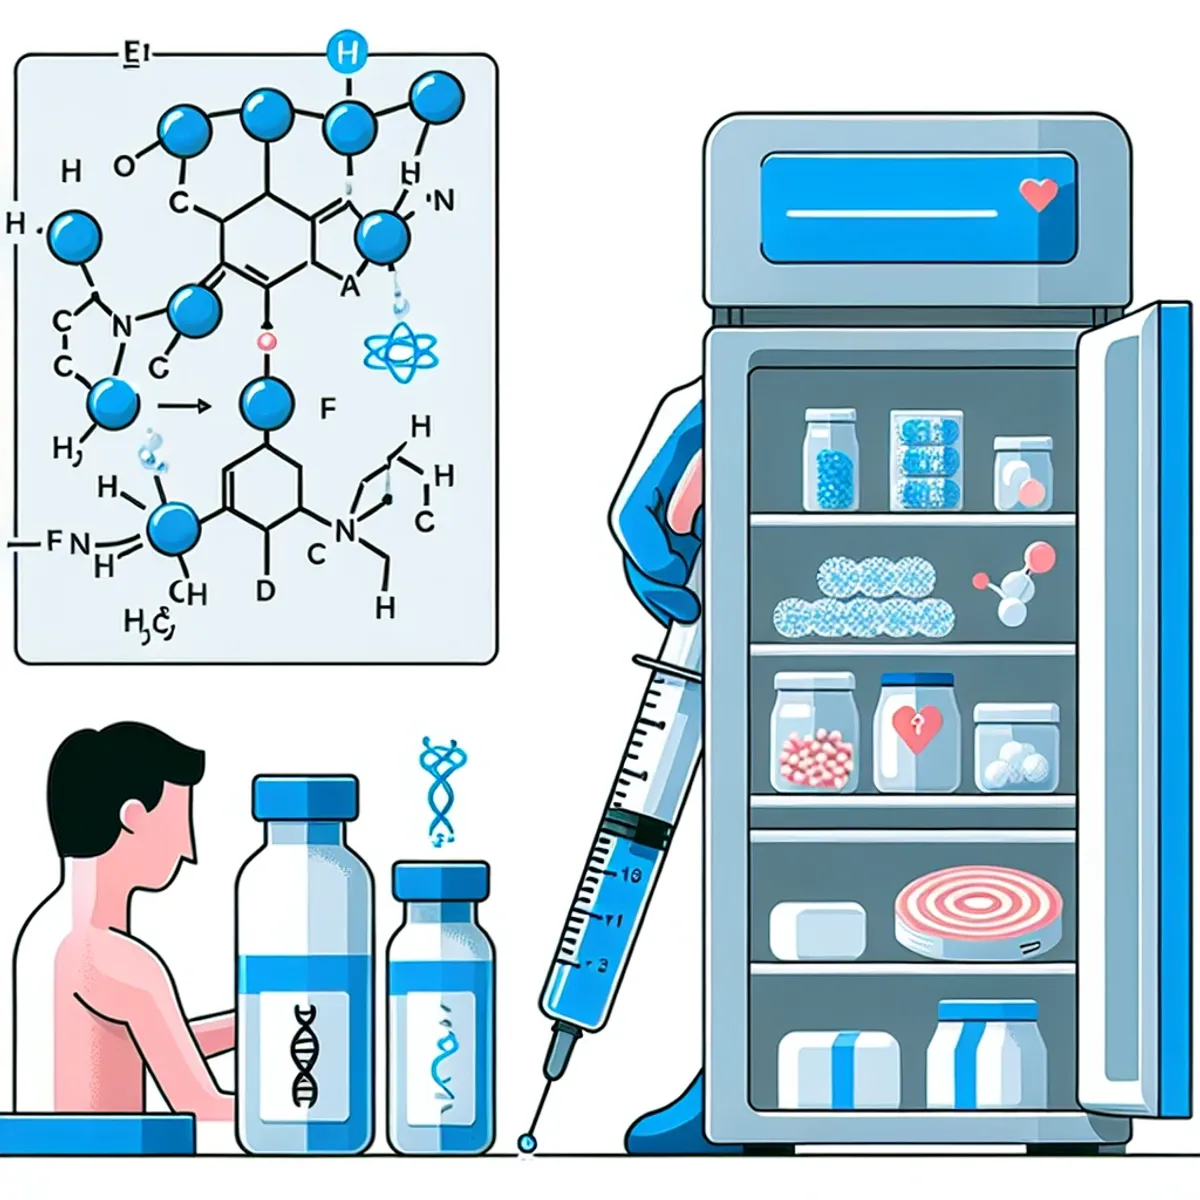 A diagrammatic representation of the molecular structure of Human Growth Hormone, a person preparing a subcutaneous injection, and a vial being placed inside a refrigerator.